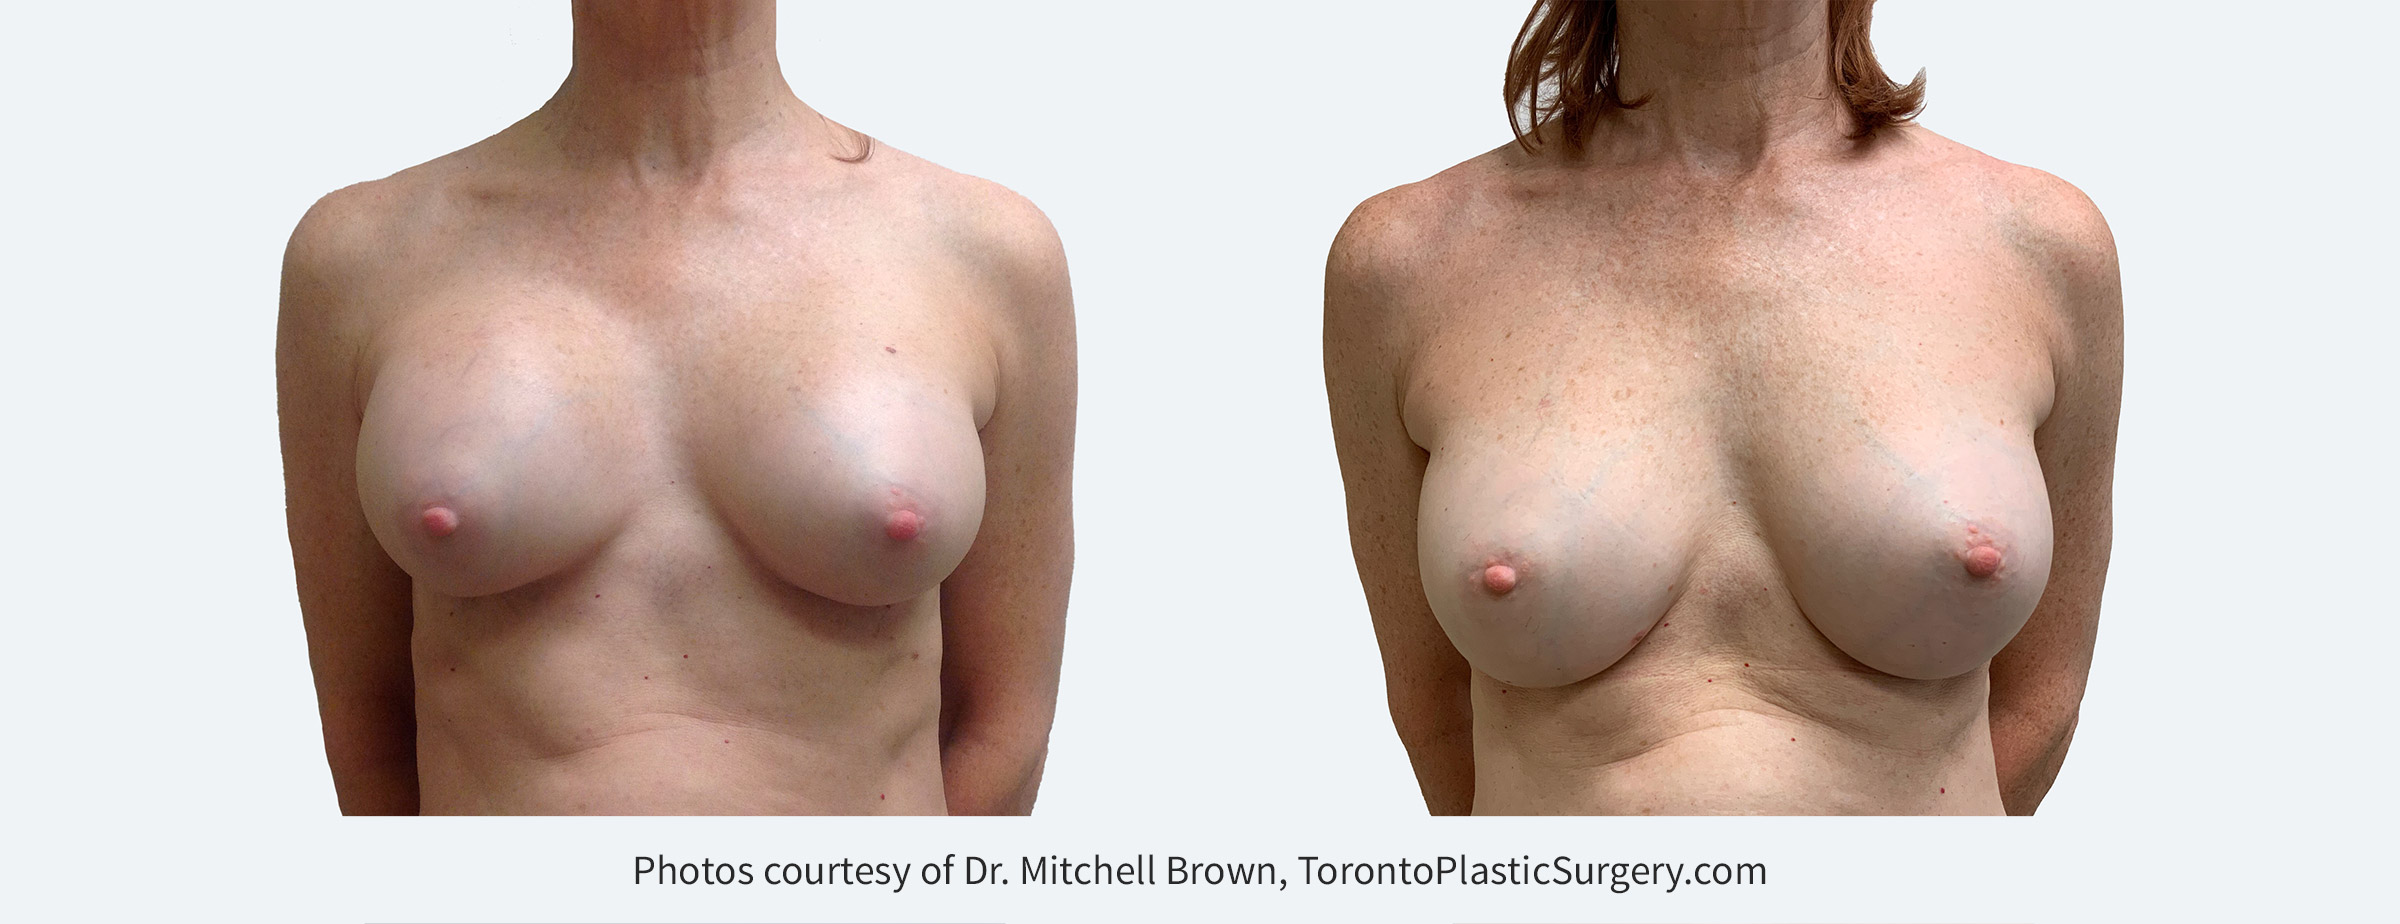 Capsular contracture fifteen years following breast augmentation with anatomic-shaped silicone gel breast implants. Treated with removal of the capsule (scar tissue) and replacement with smooth round silicone gel breast implants. Before and 6 months after.